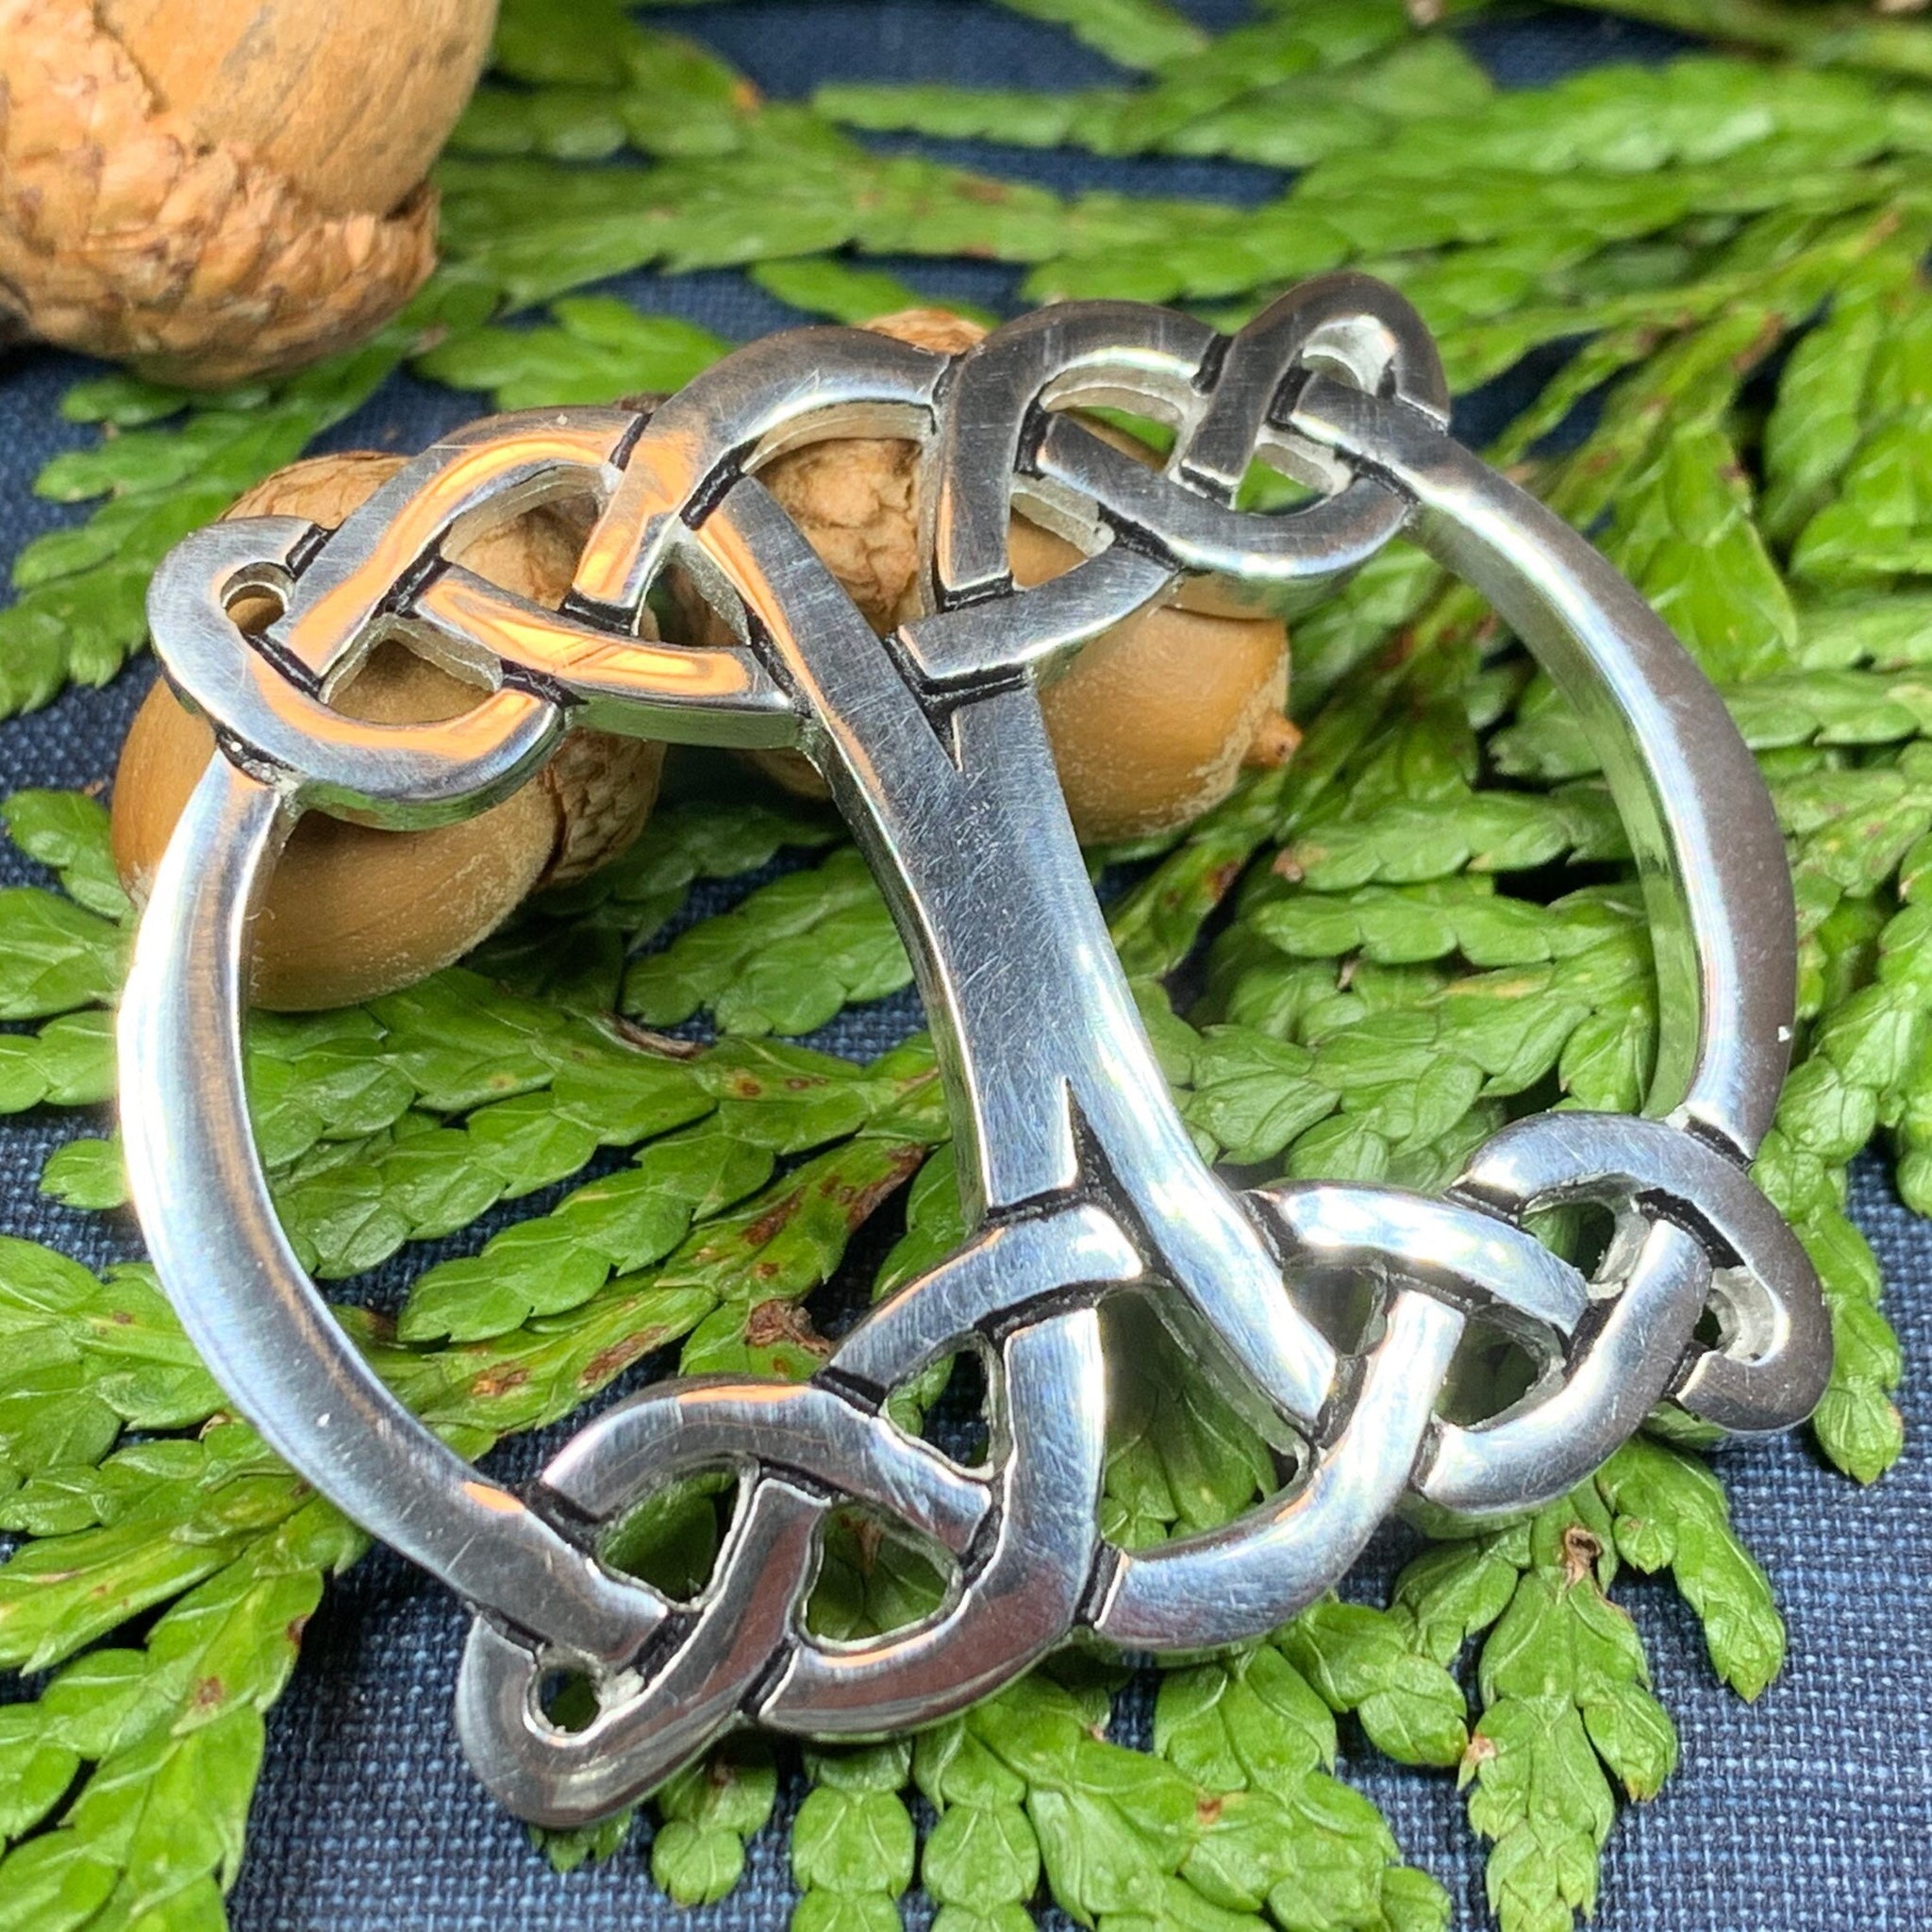 Celtic Knot Scarf Ring – Celtic Crystal Design Jewelry